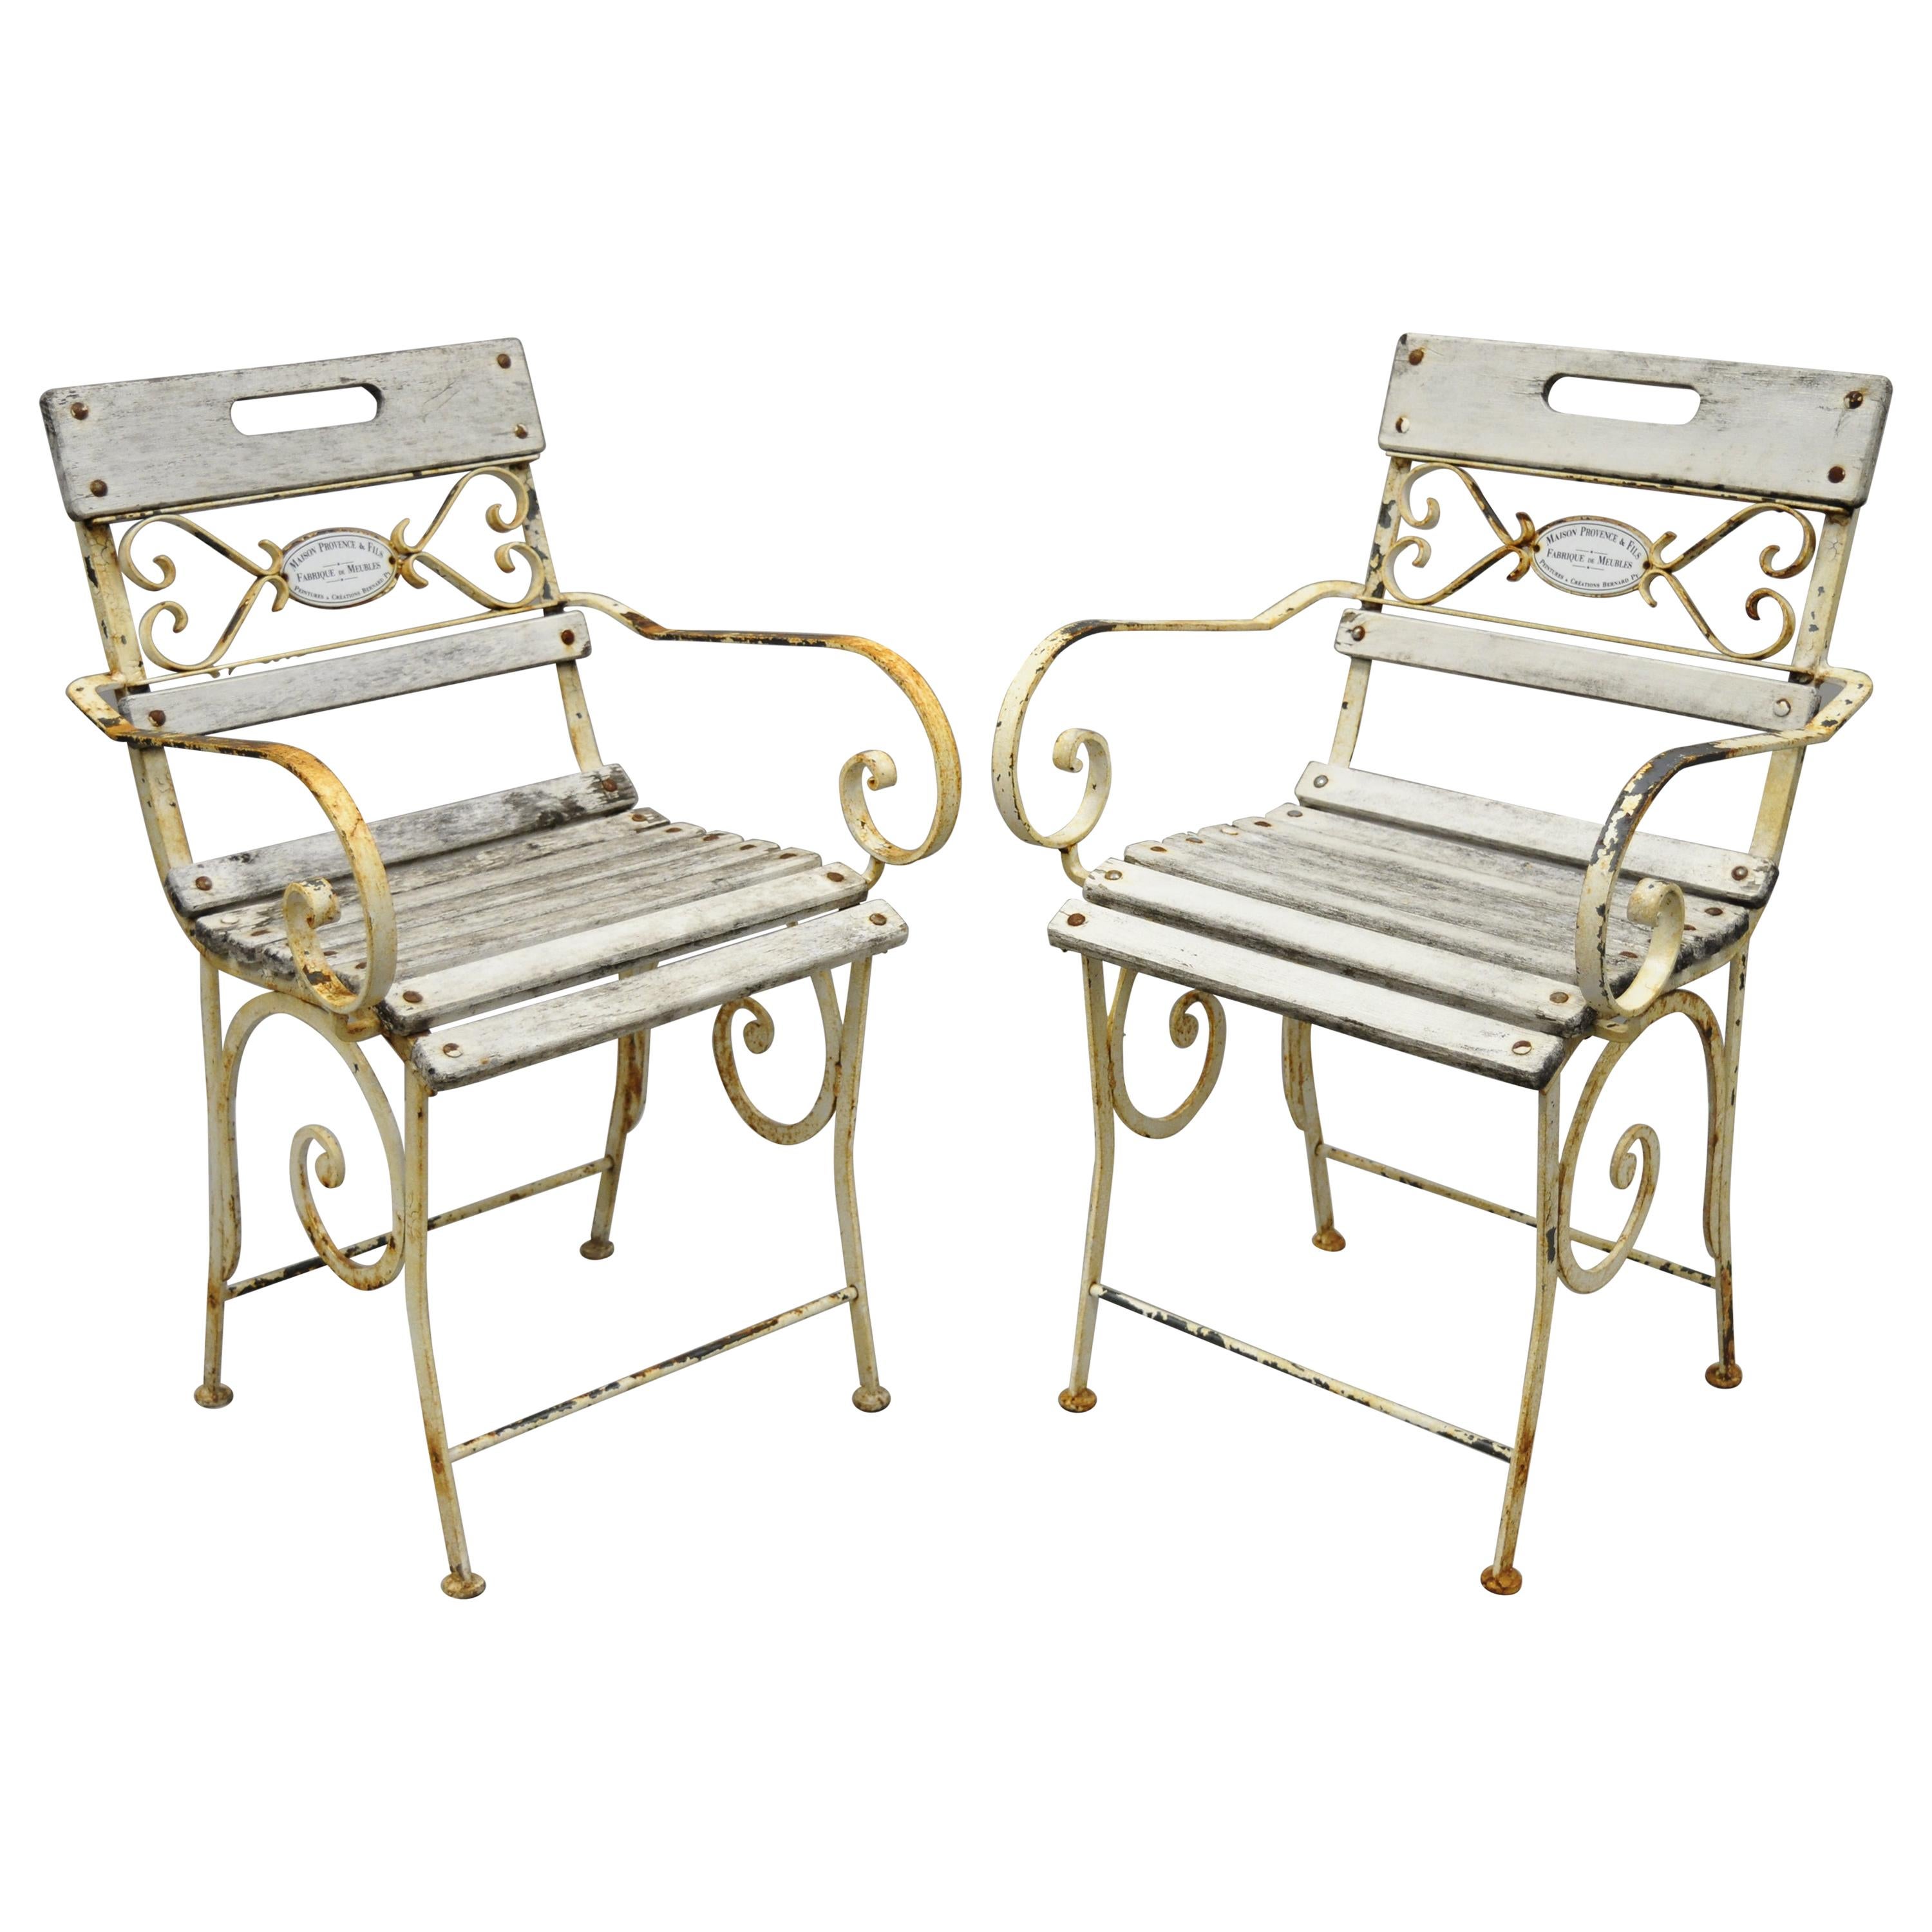 2 French Wrought Iron Wood Slat Seat Garden Arm Chairs by Maison Provence & Fils